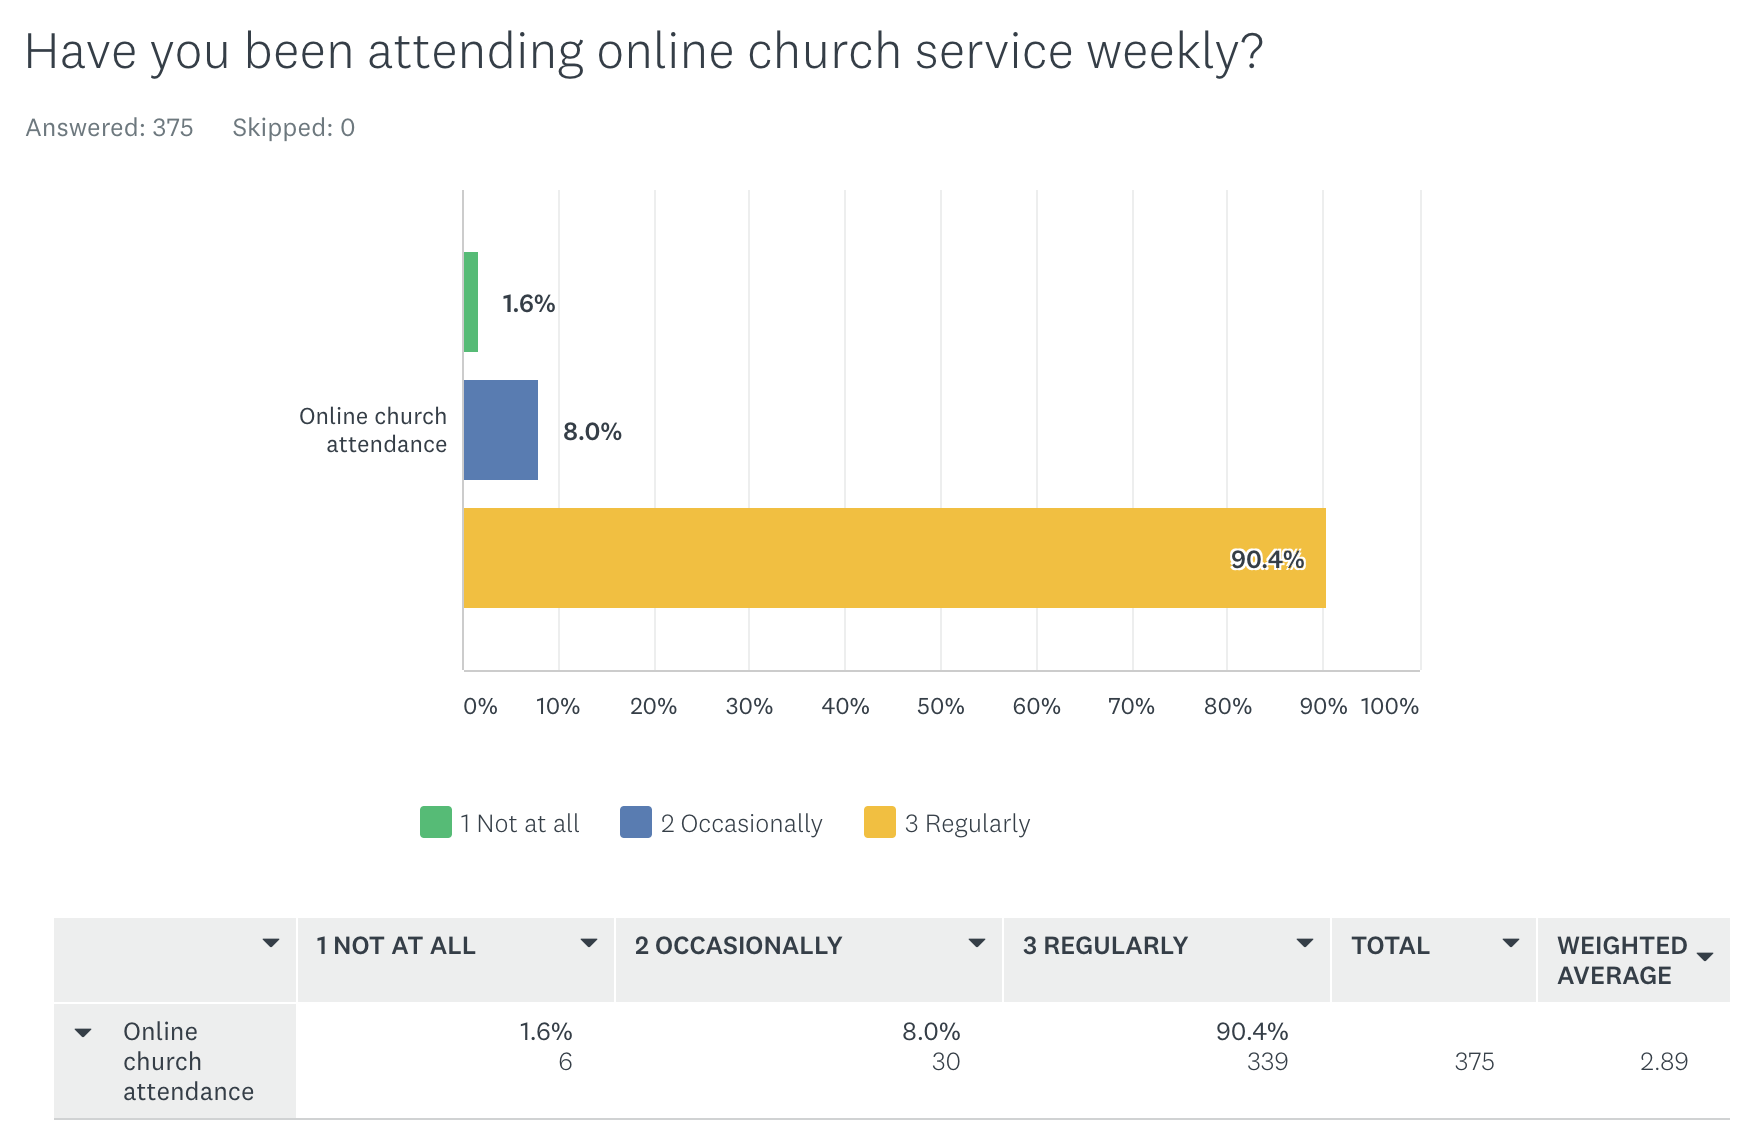 Have you been attending onmline church service weekly?